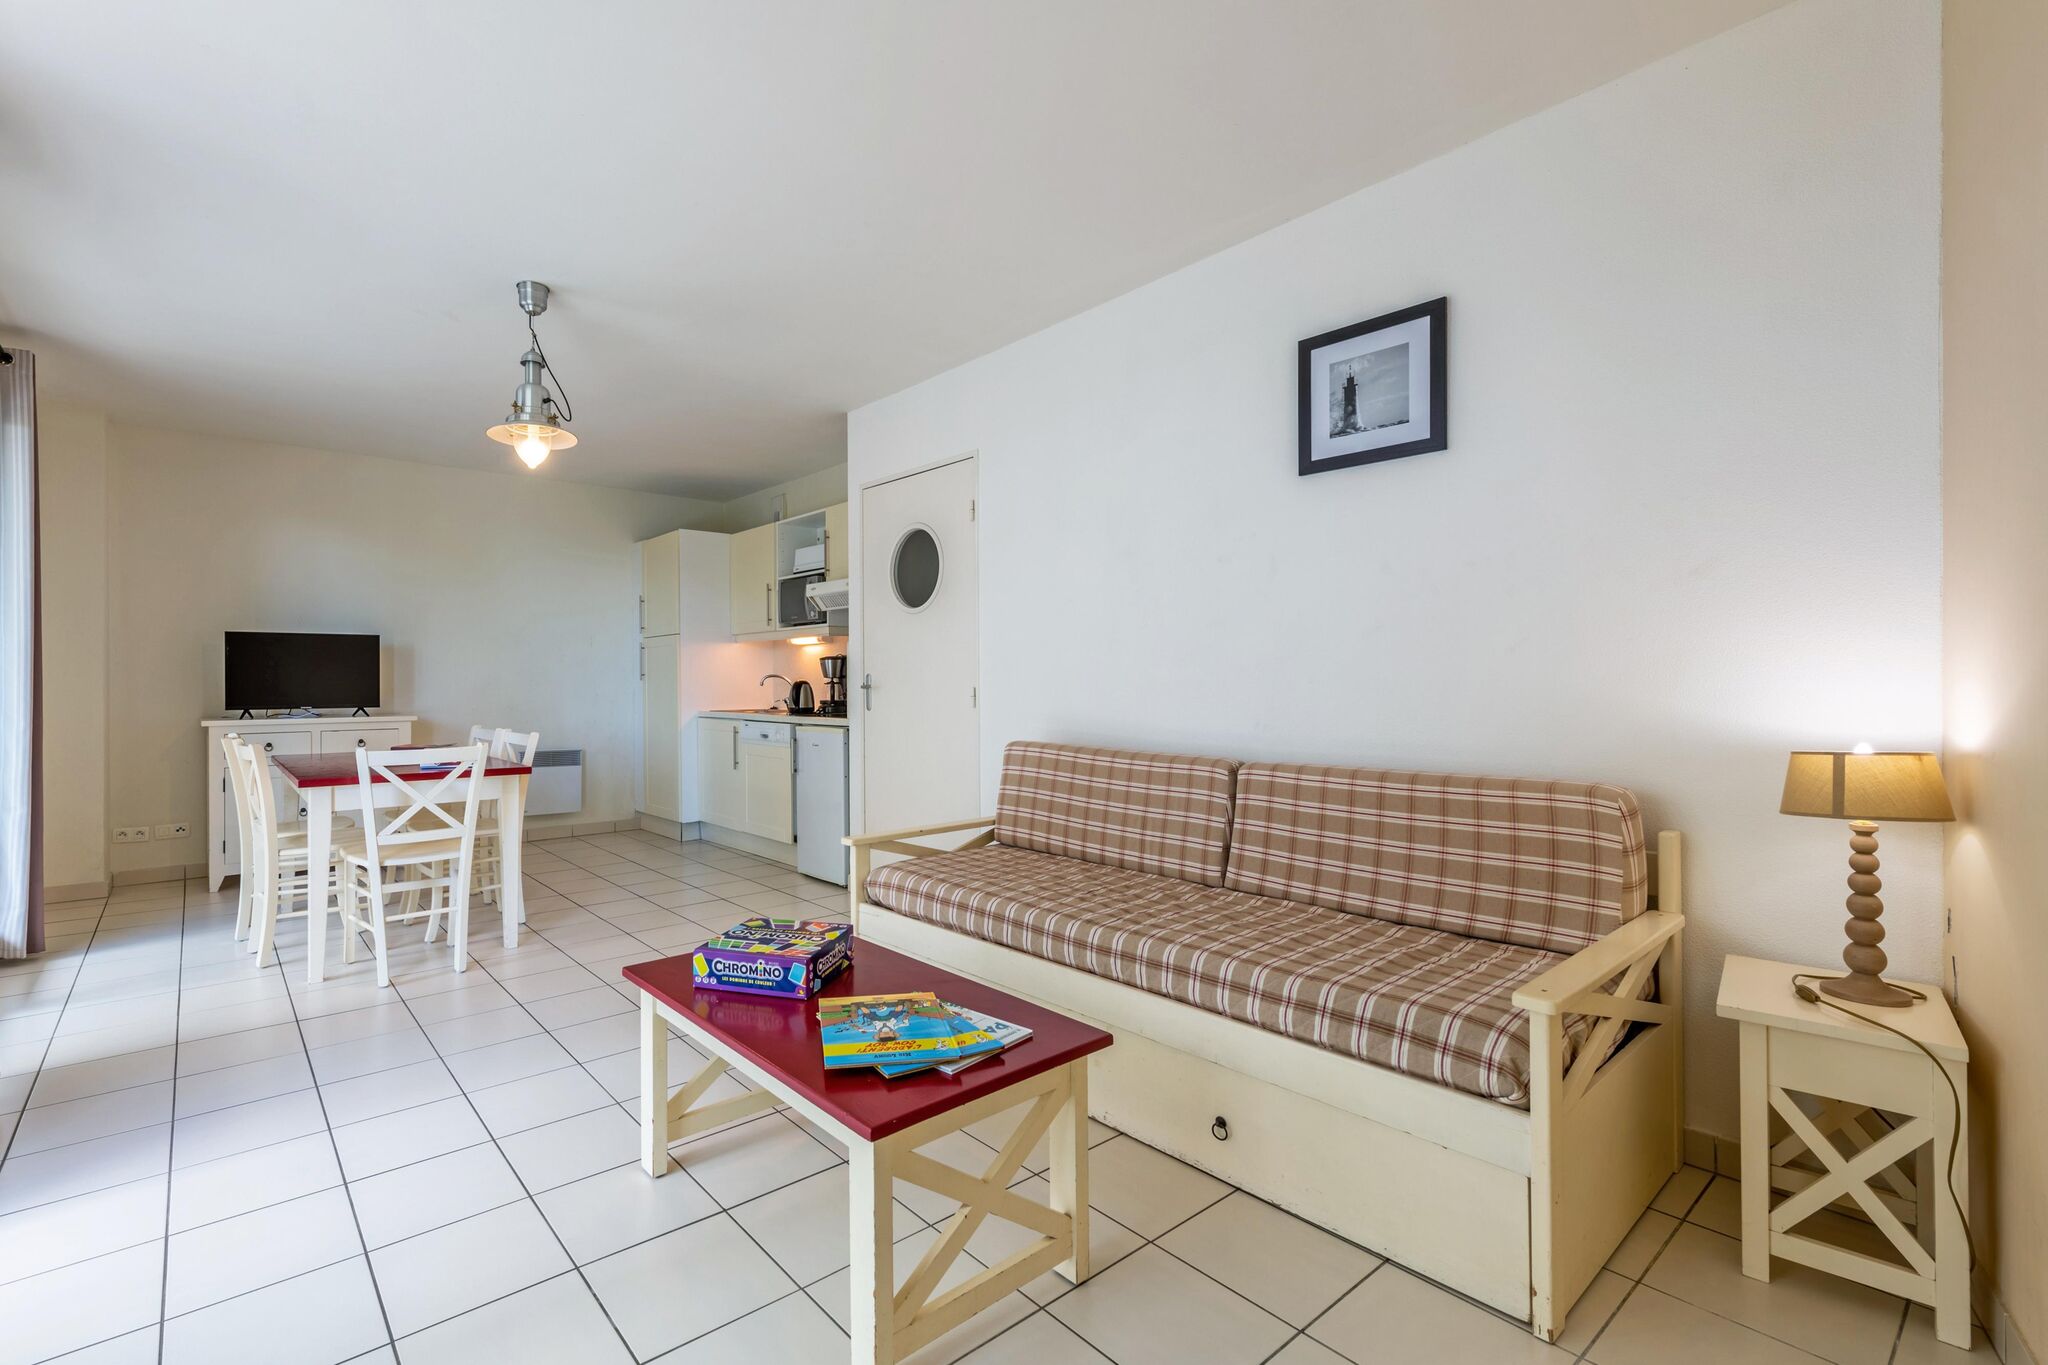 Apartment near the beach in the Finistère